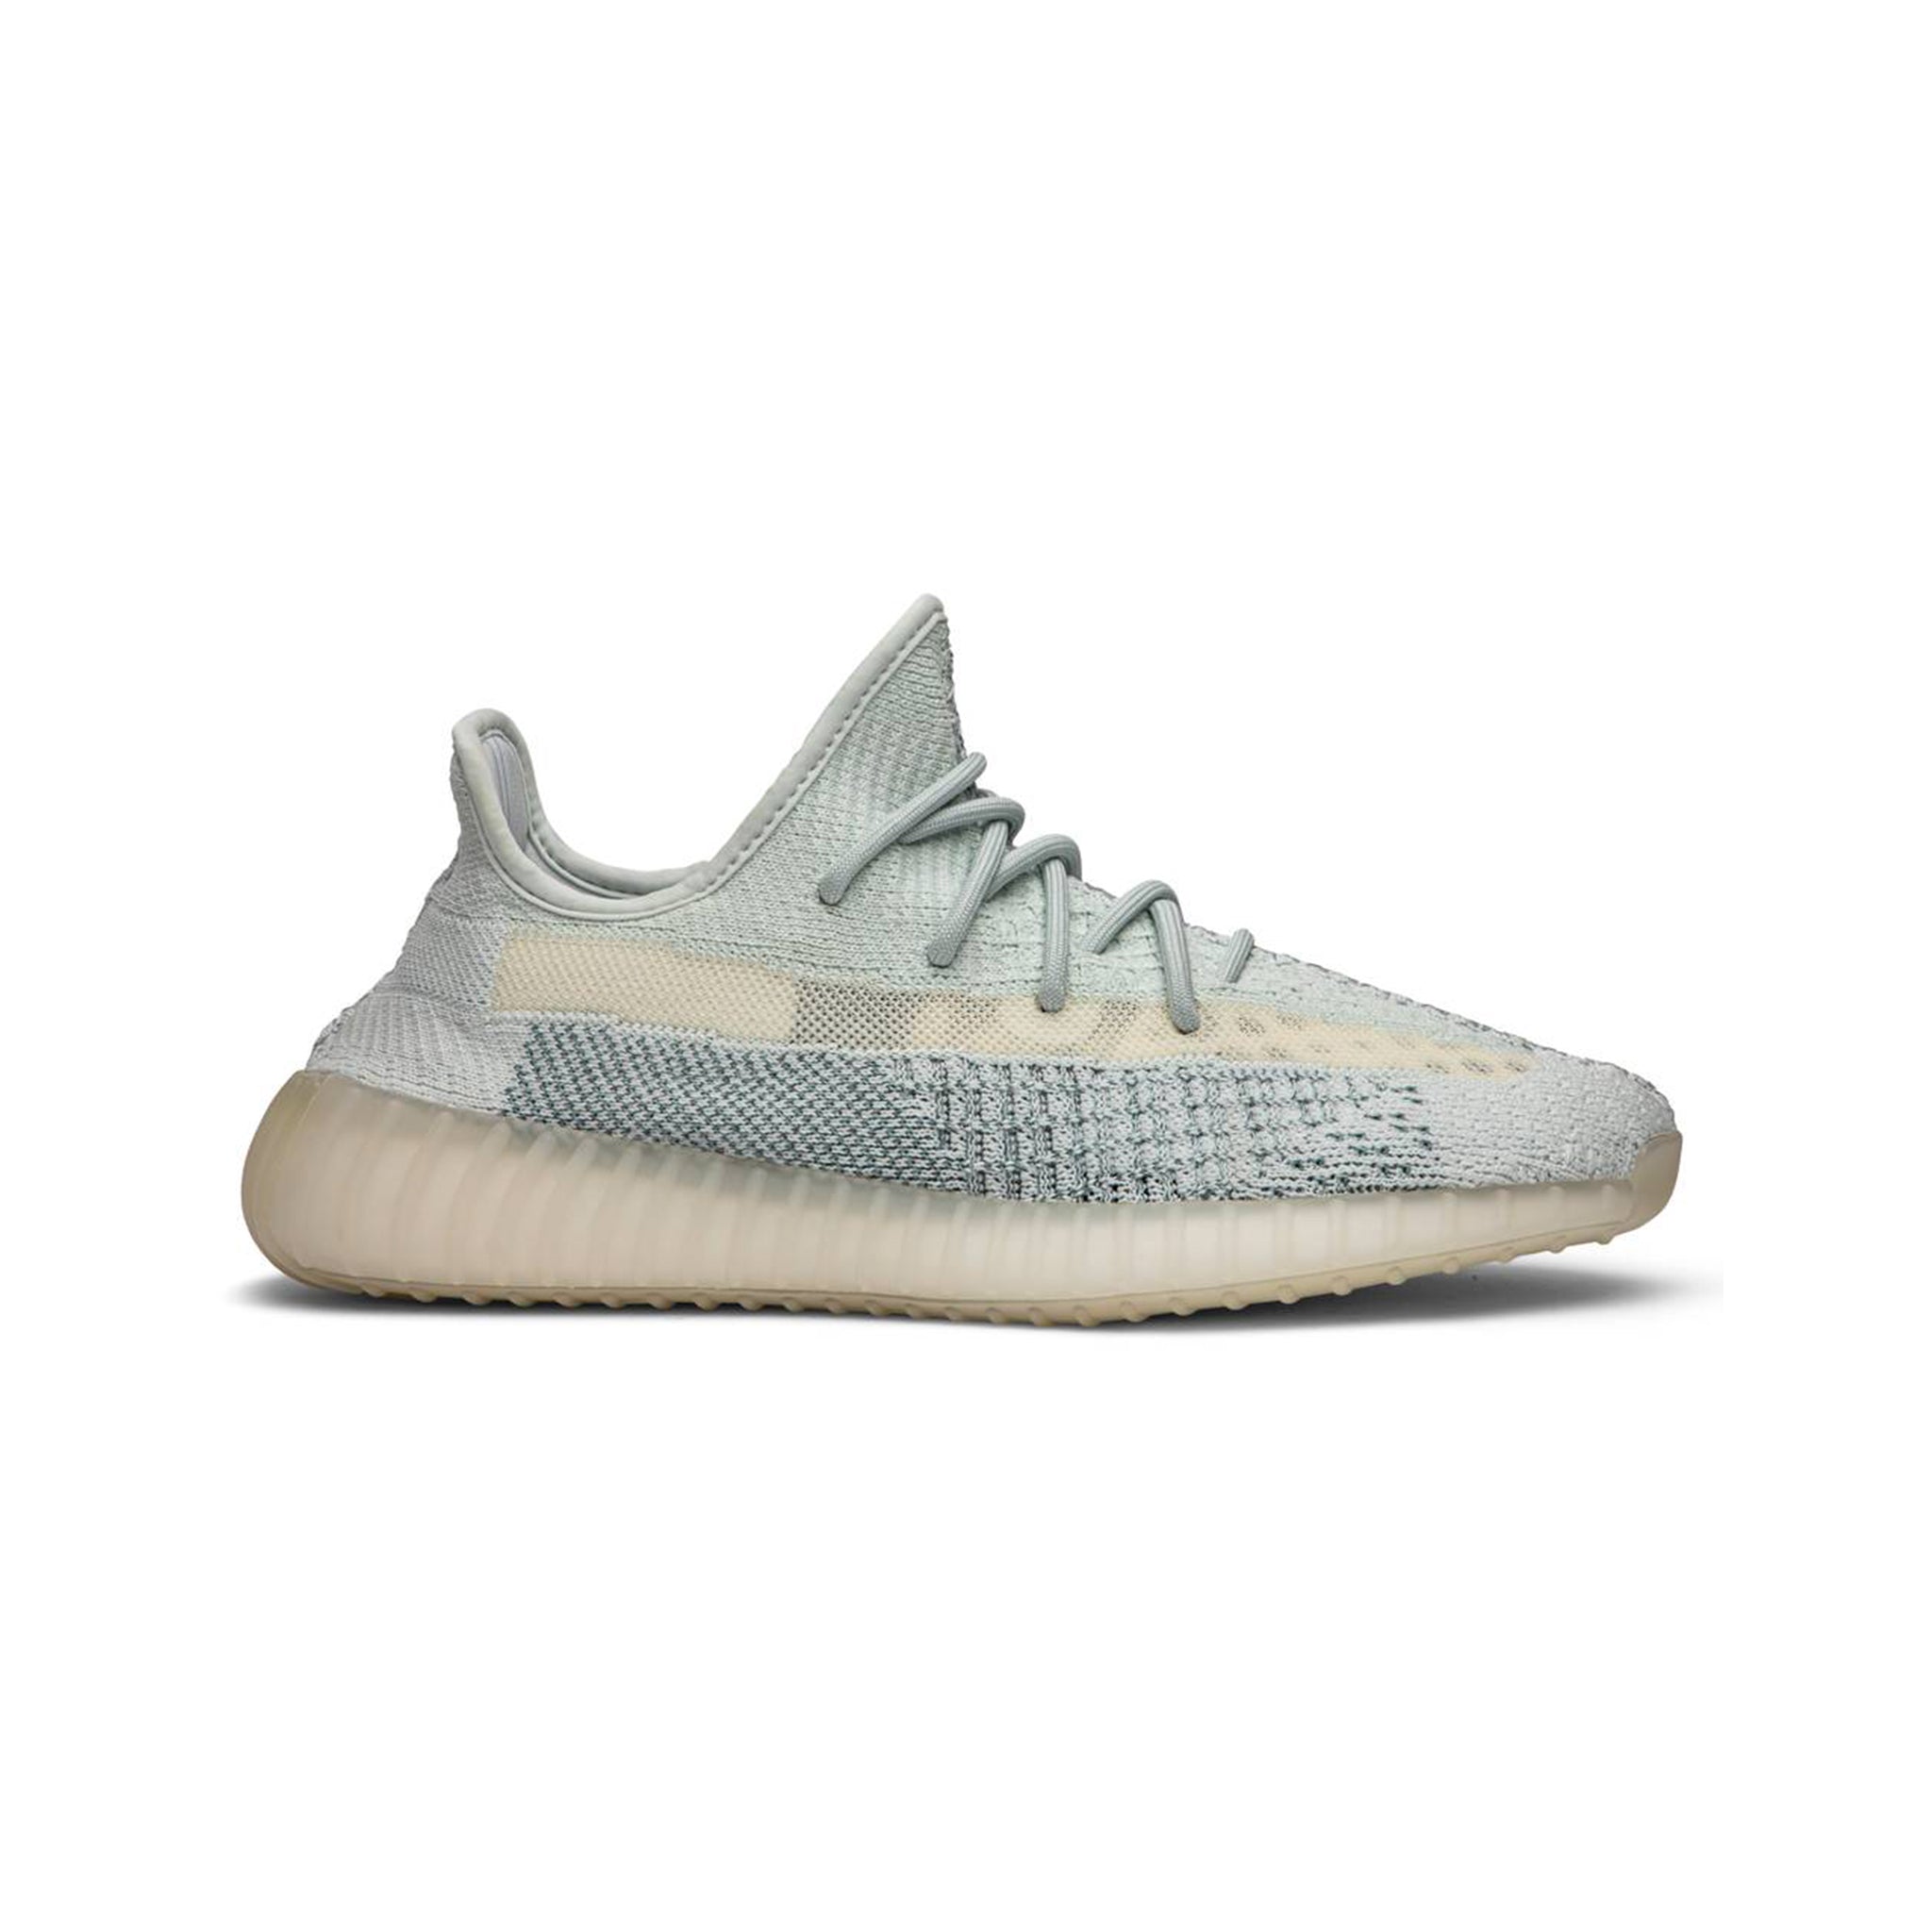 adidas yeezy boost cloud white